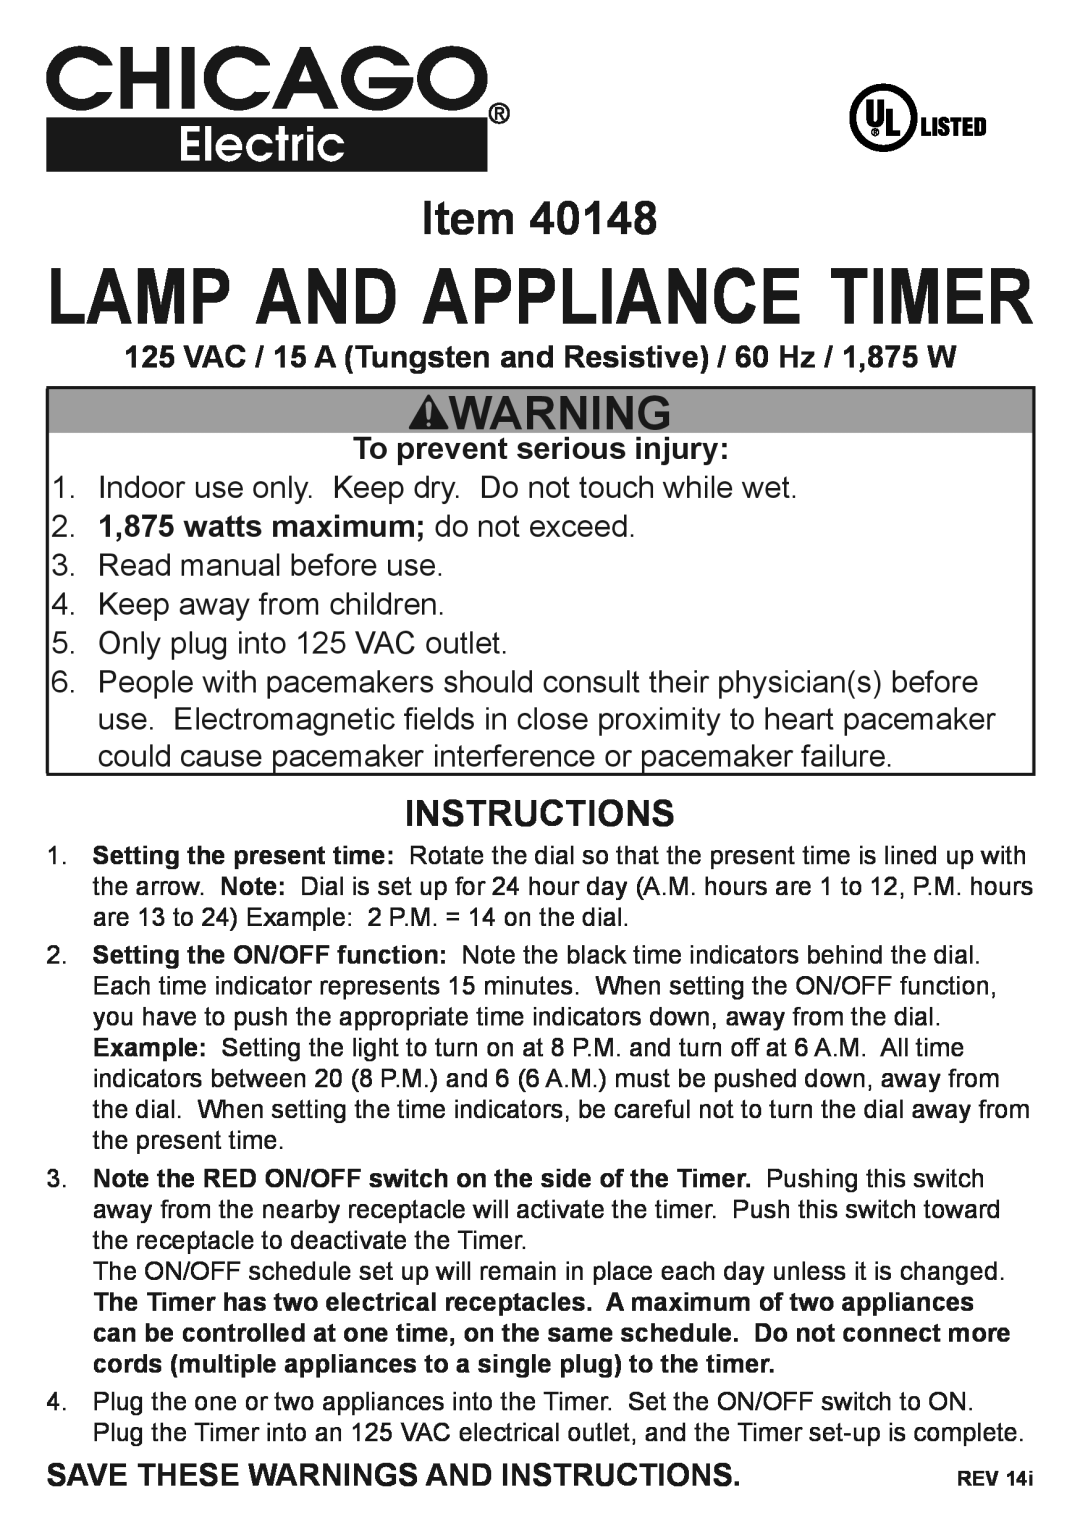 Chicago Electric 40148 manual Lamp and Appliance Timer, Instructions, To prevent serious injury, Read manual before use 